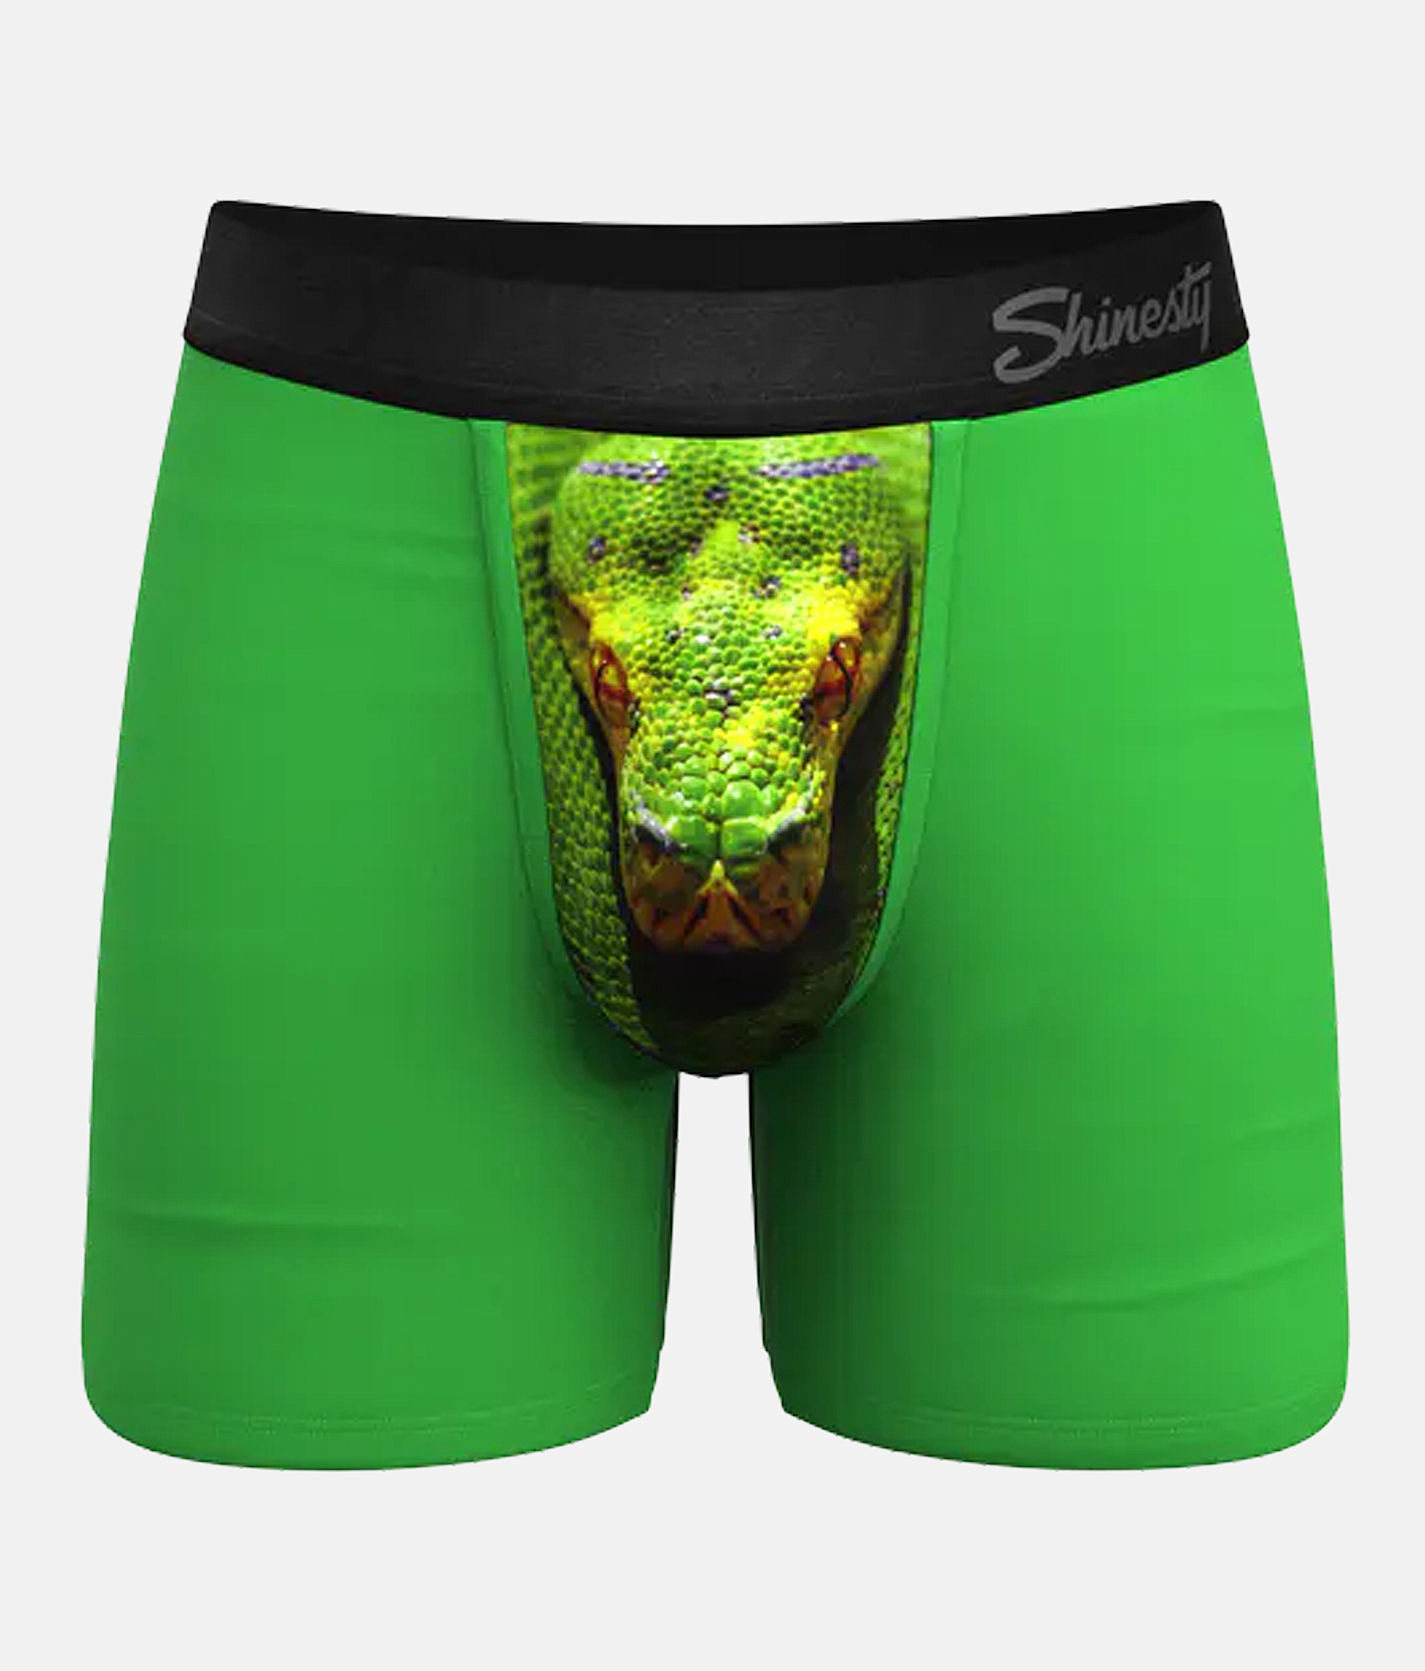 Shinesty® The Trouser Snake Stretch Boxer Briefs - Men's Boxers in Green